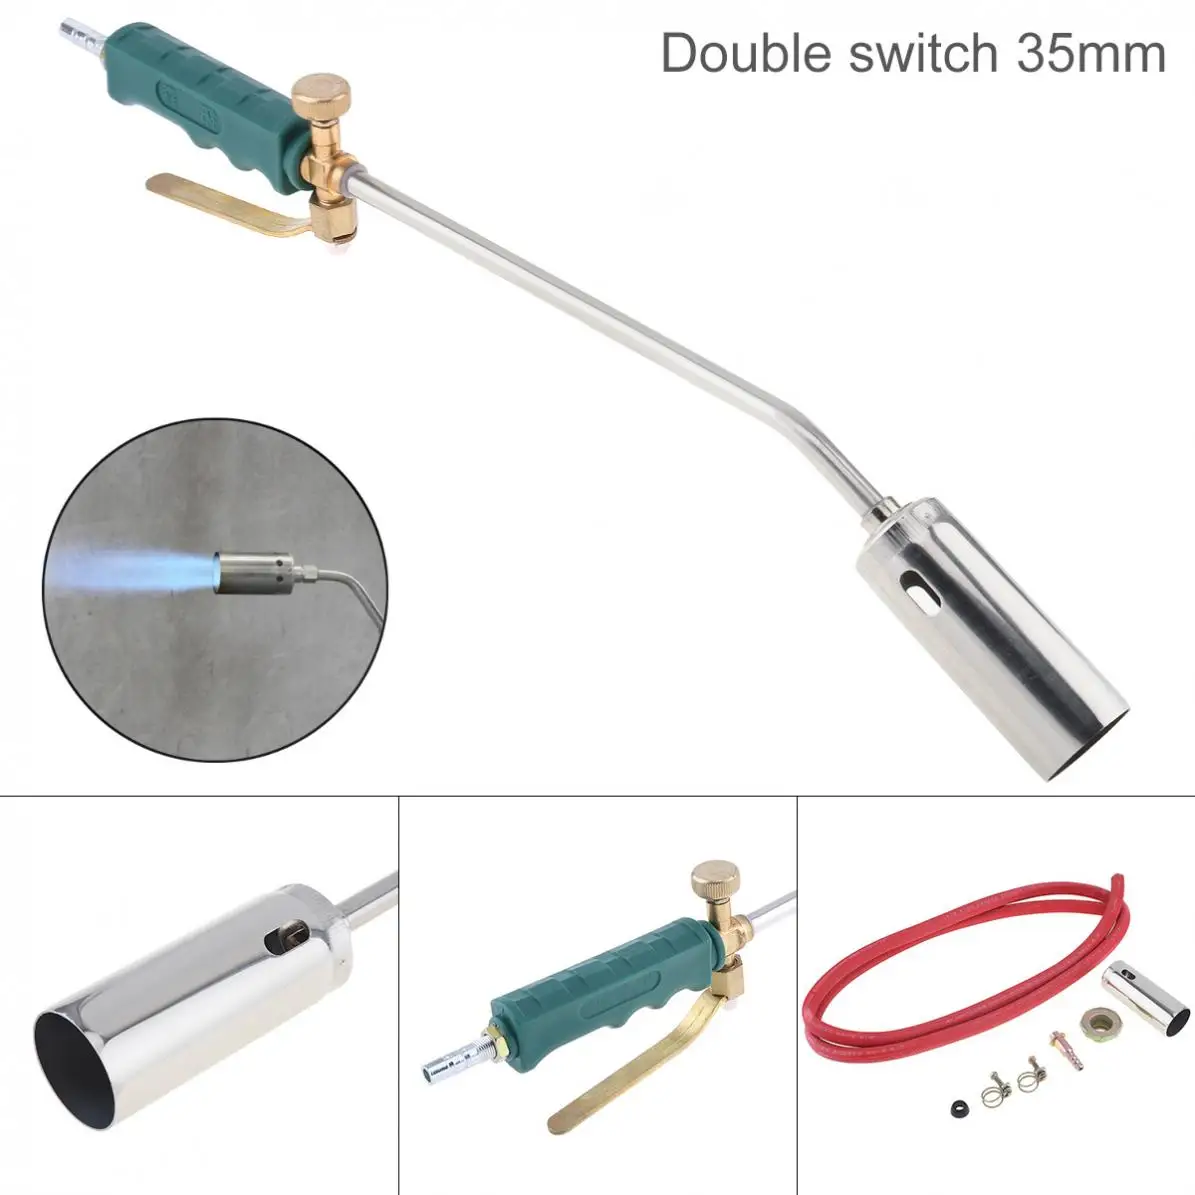 

35mm Double Switch Type Liquefied Gas Torch Welding Spitfire-Gun Support Oxygen Acetylene Propane for Barbecue/ Hair Removal